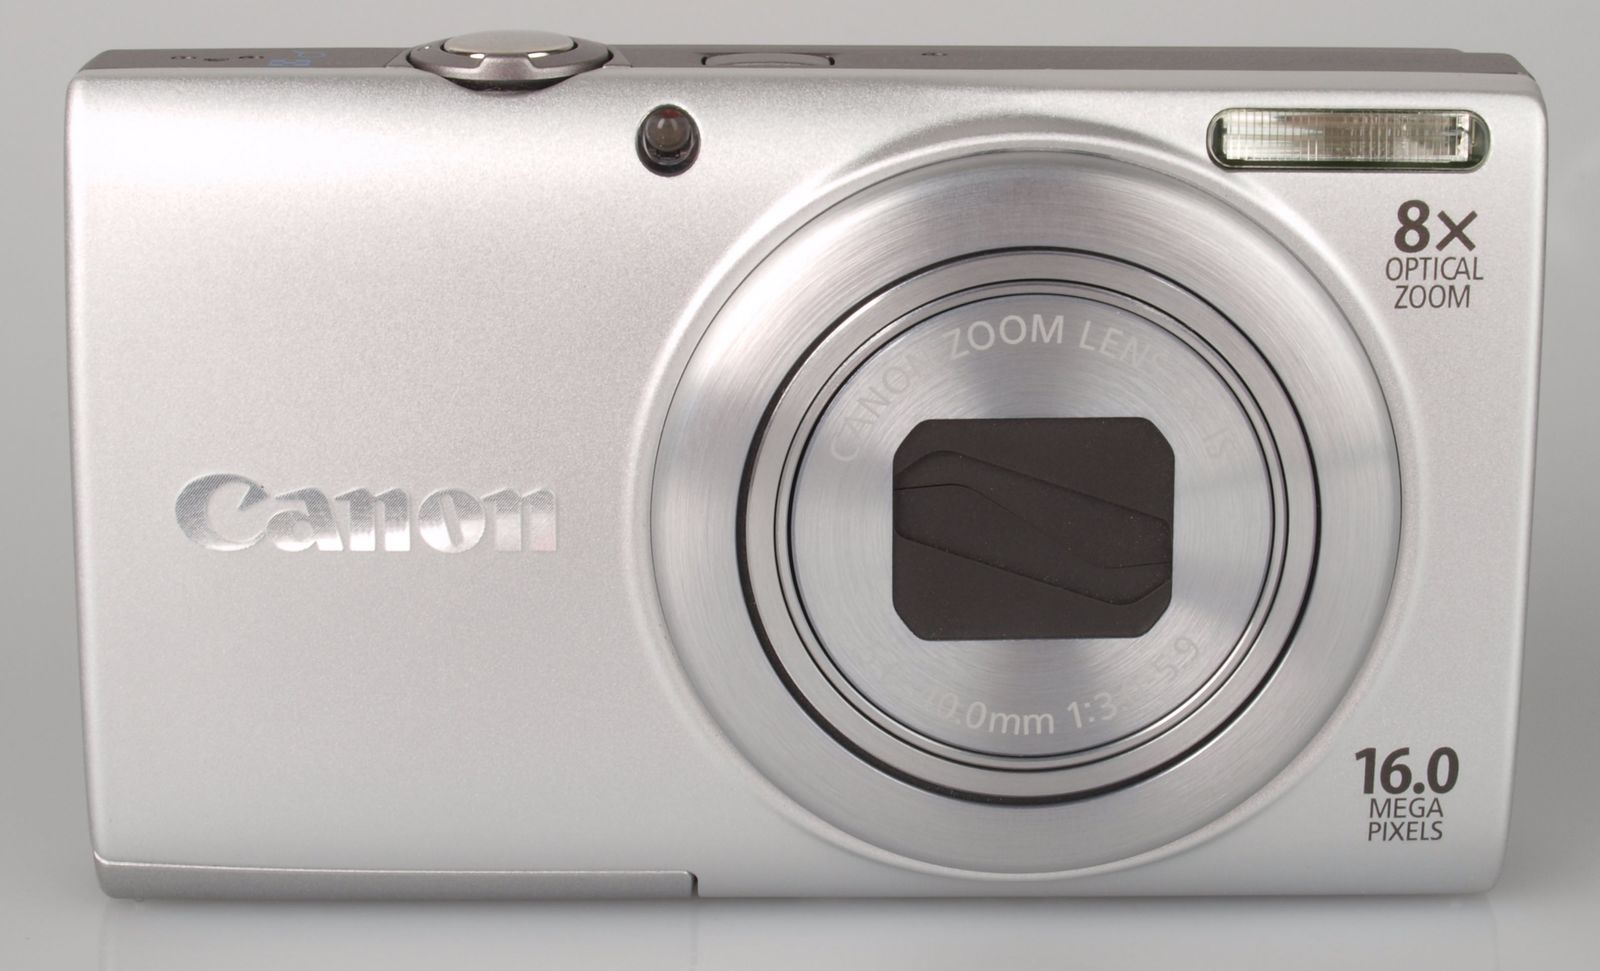 Canon Powershot A4000 IS Review